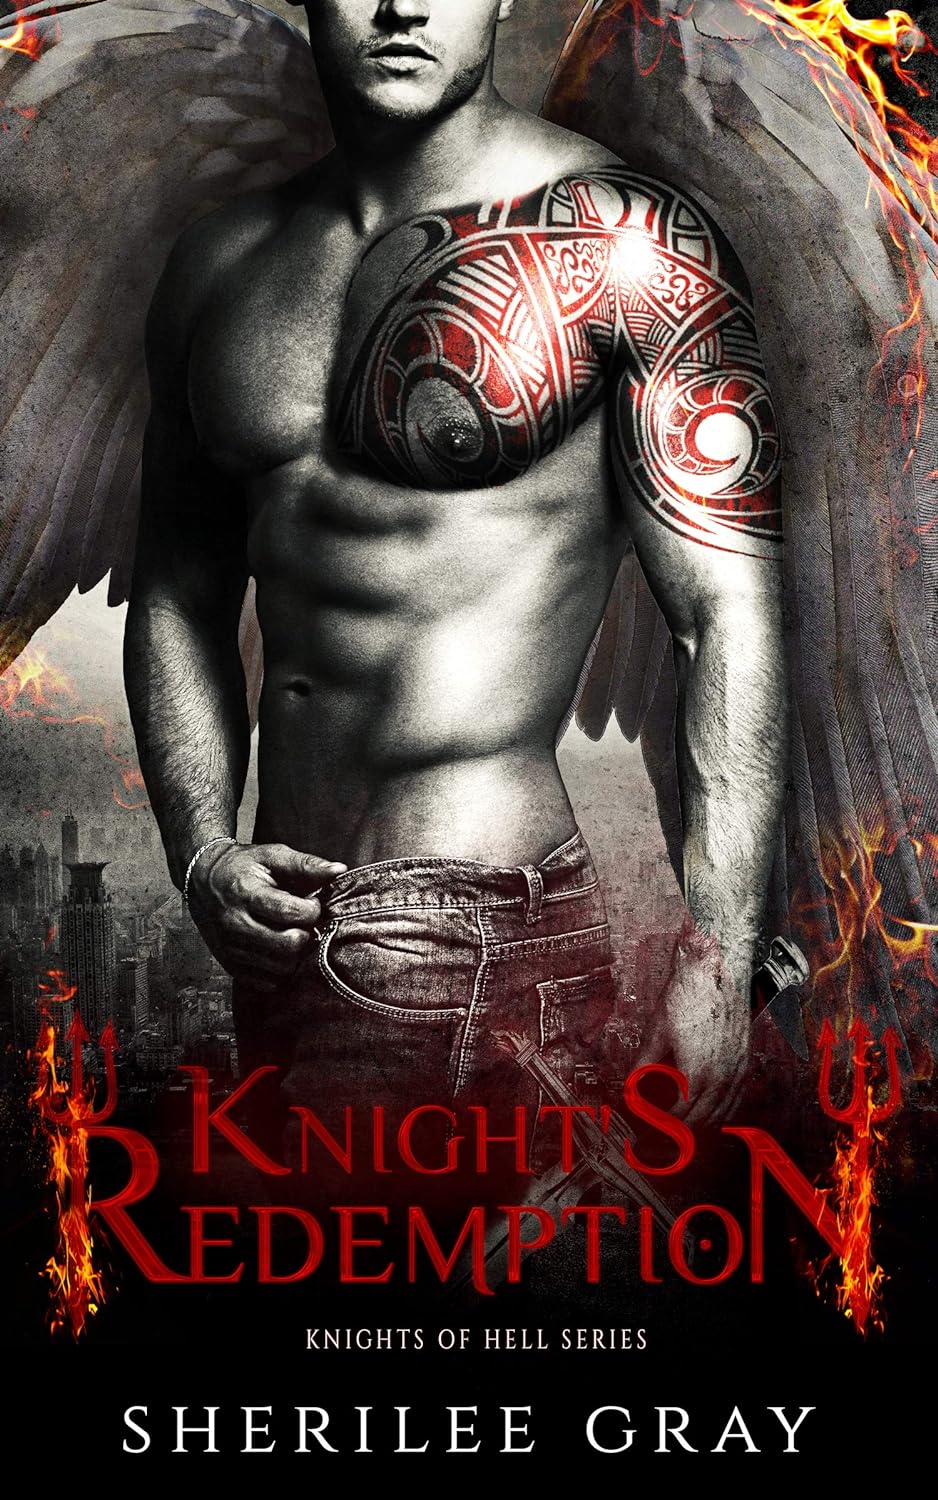 Knight’s Redemption Paranormal Romance by Author Sherilee Gray